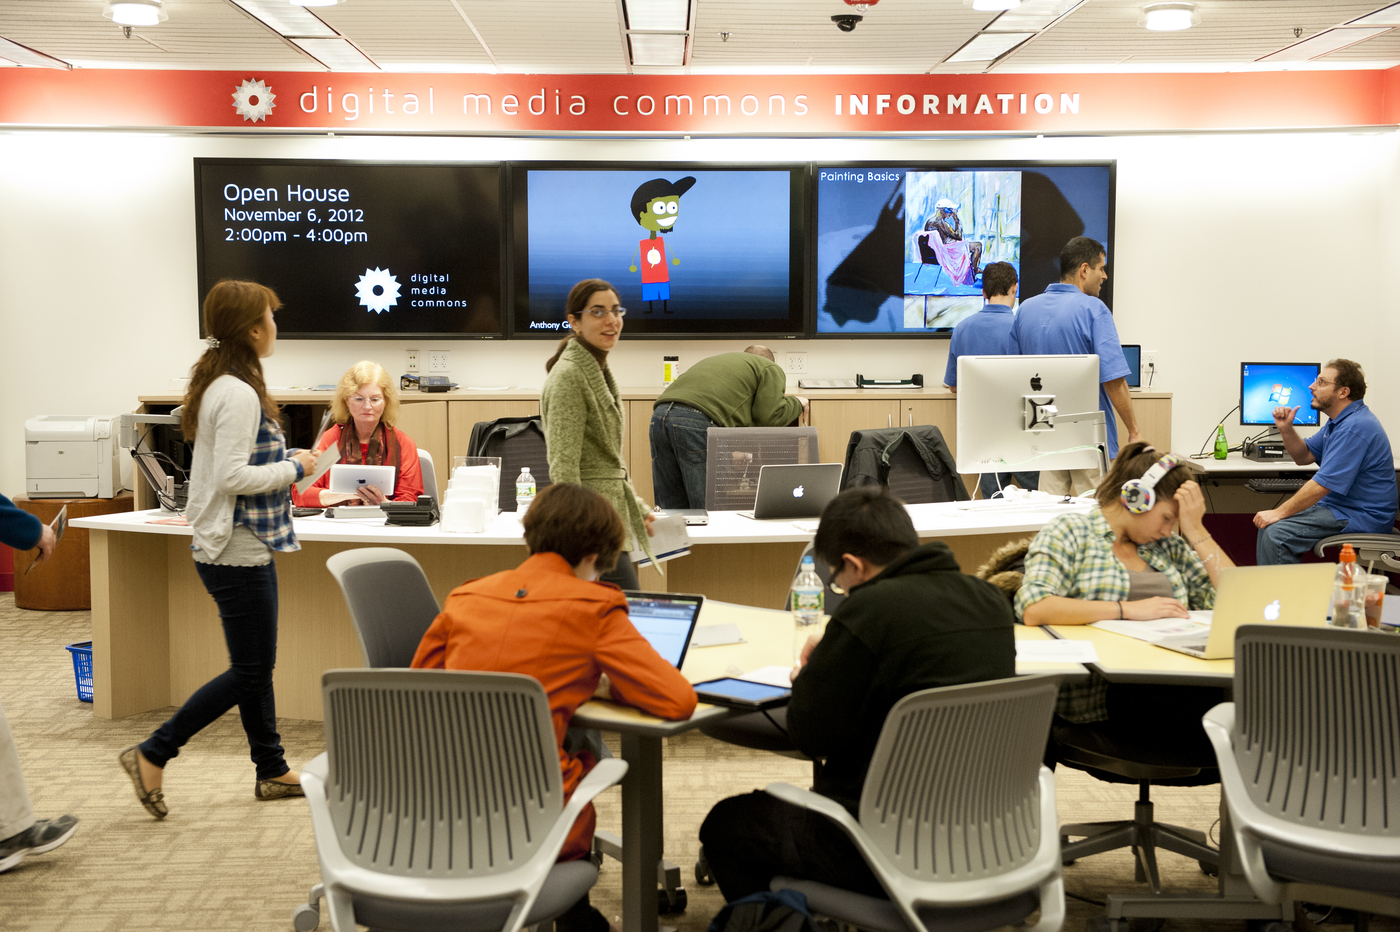 Get To Know The Digital Media Commons And How It Can Help You